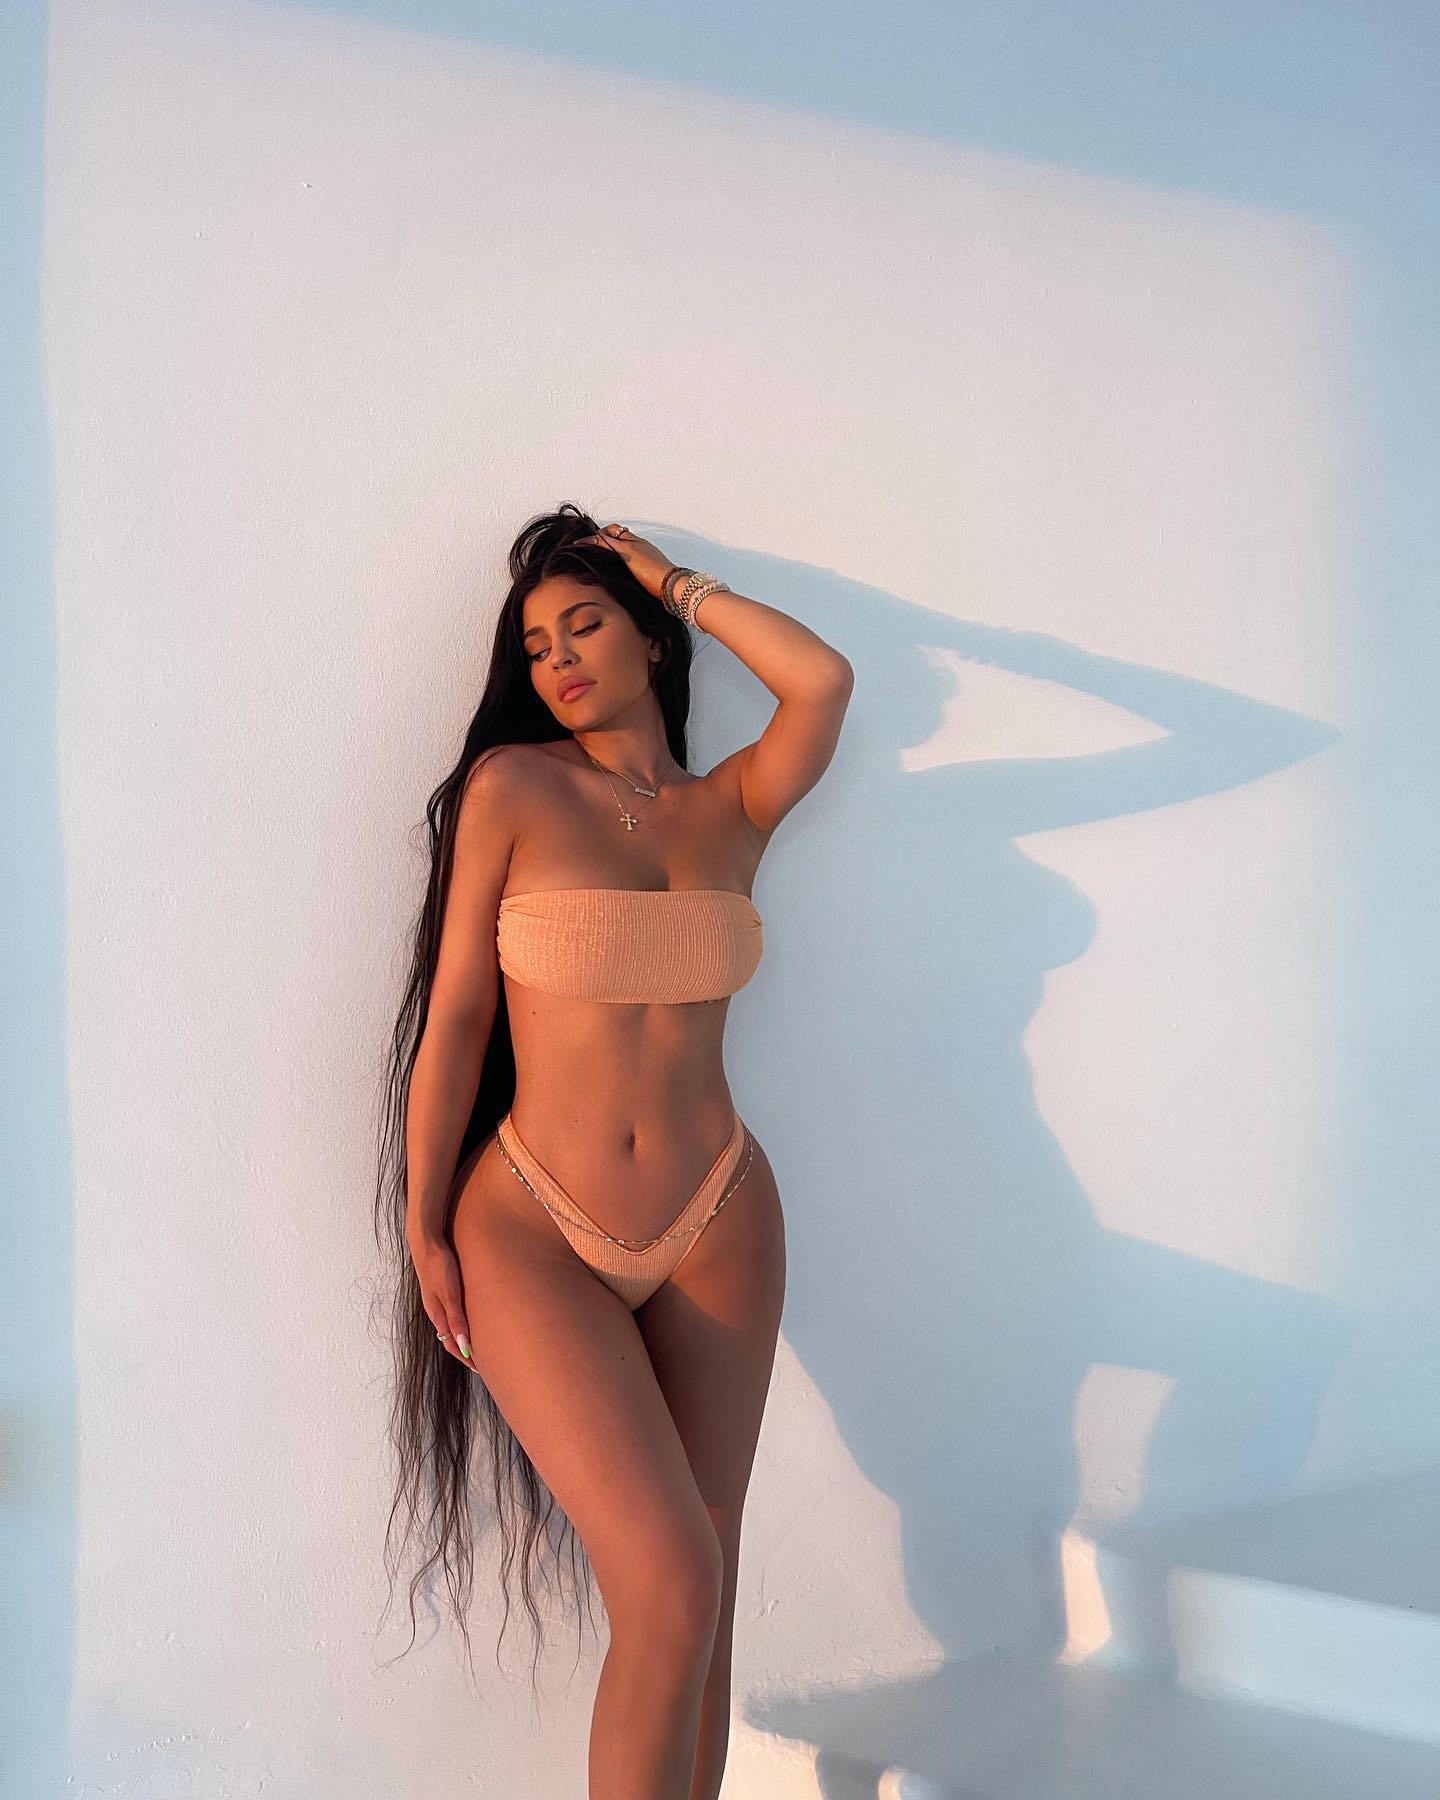 Photos n°2 : Kylie Jenner’s Shadow is Breaking the Internet!